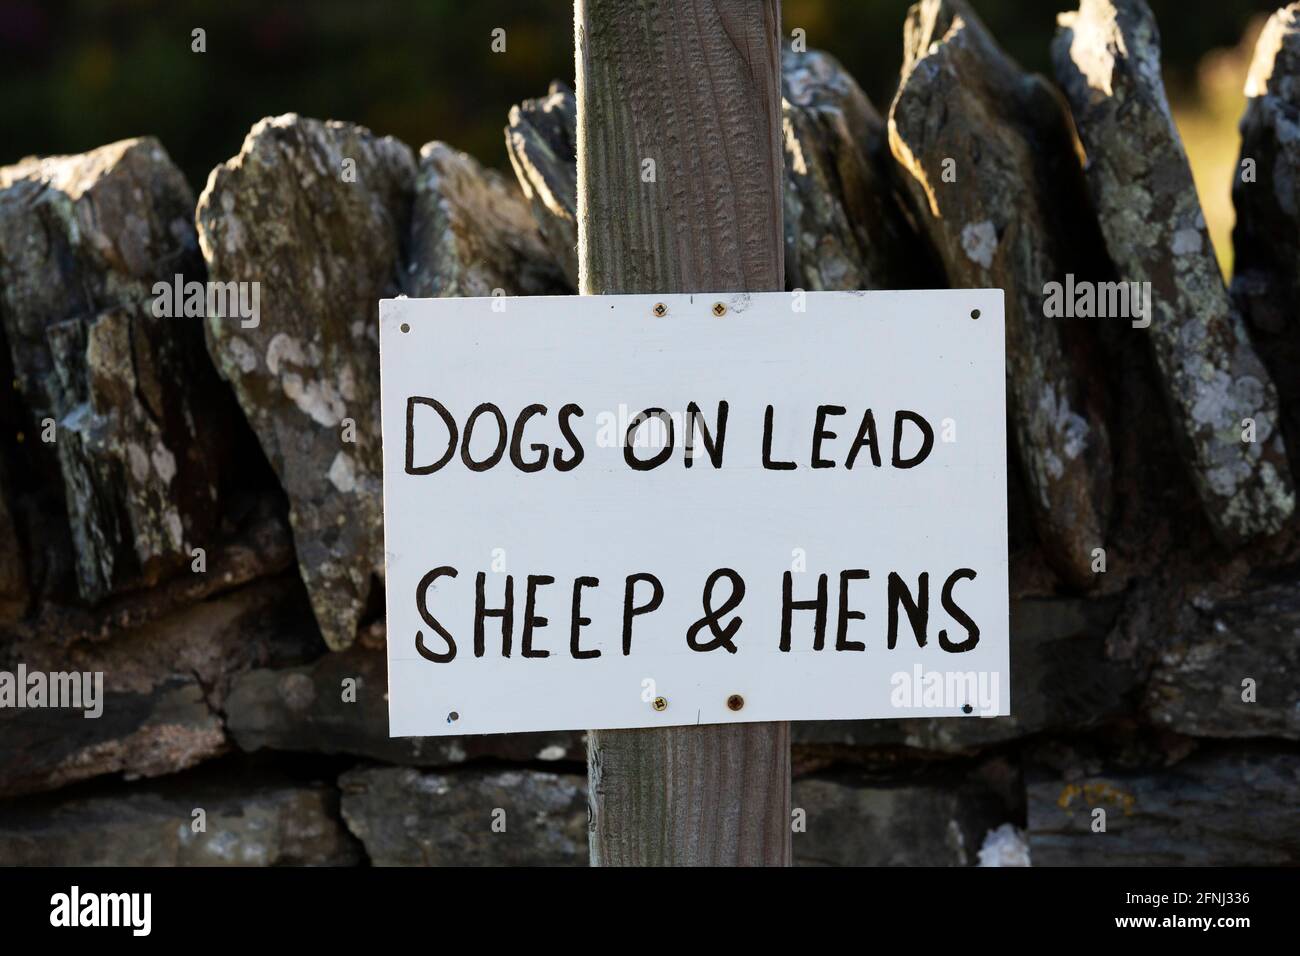 A sign reminds walker to keep their dogs on leads in Cumbria, England. The farmland through which people walk has sheep and hens. Stock Photo